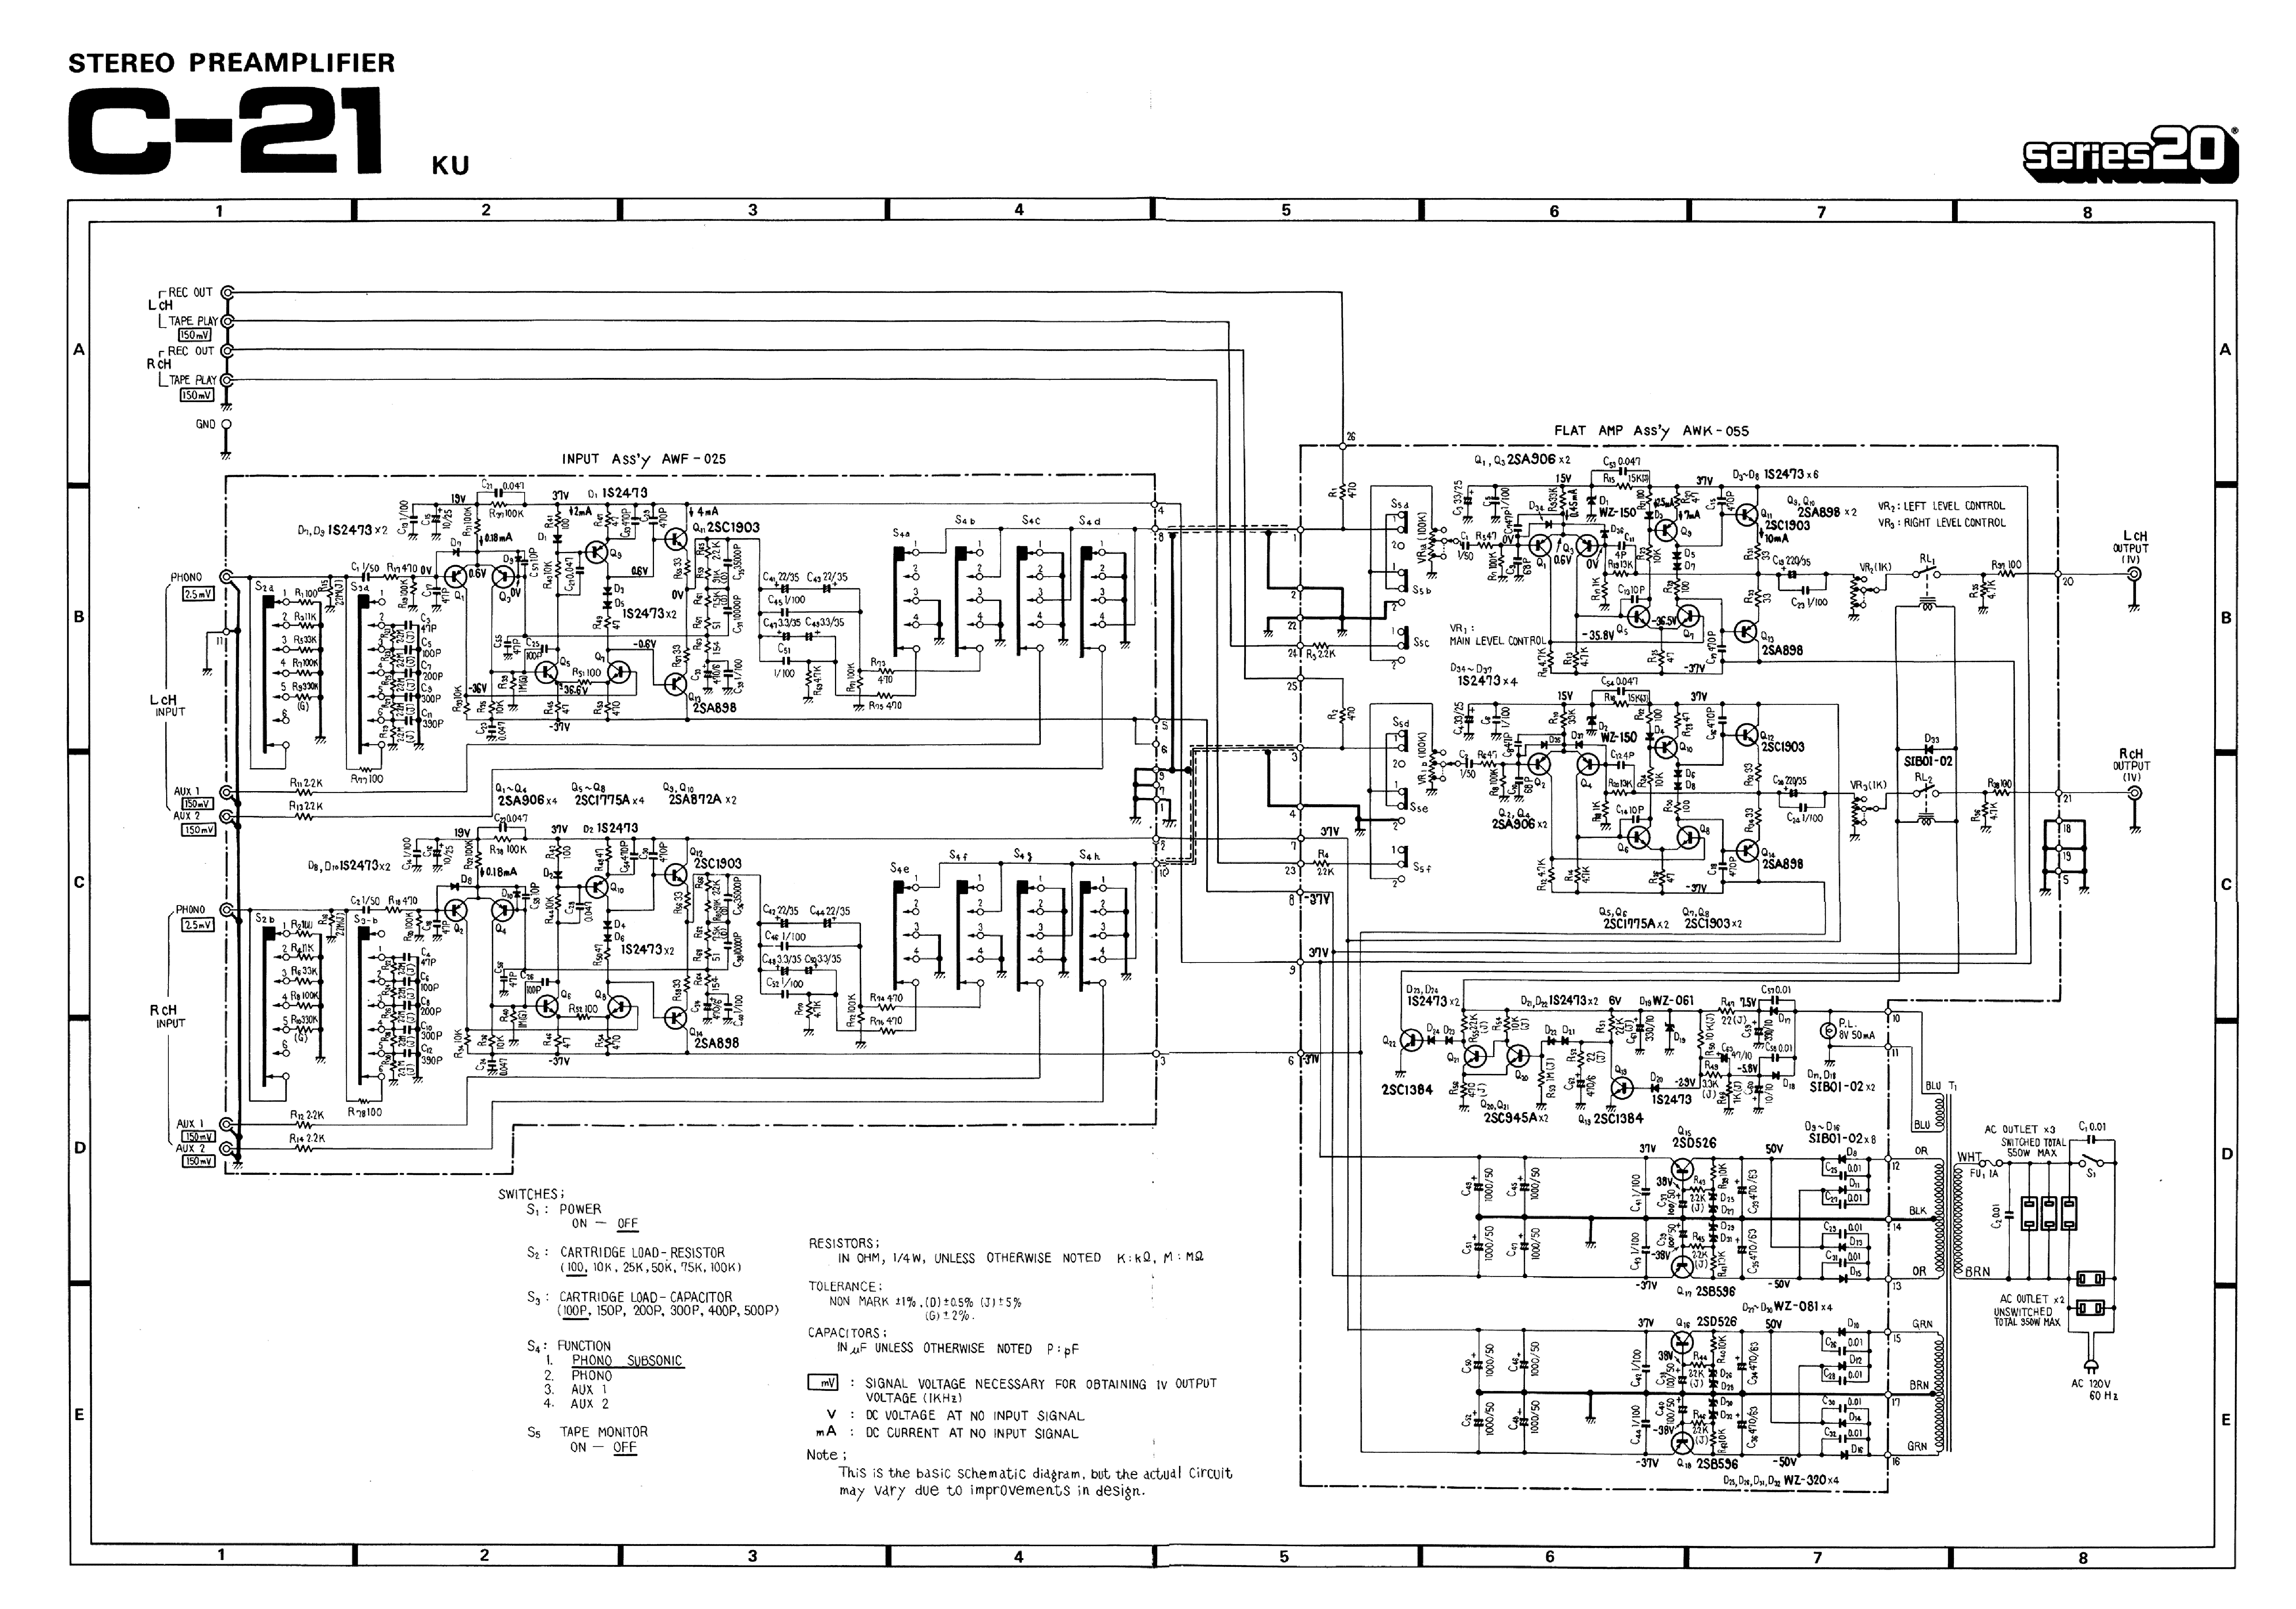 PIONEER C-21 service manual (1st page)